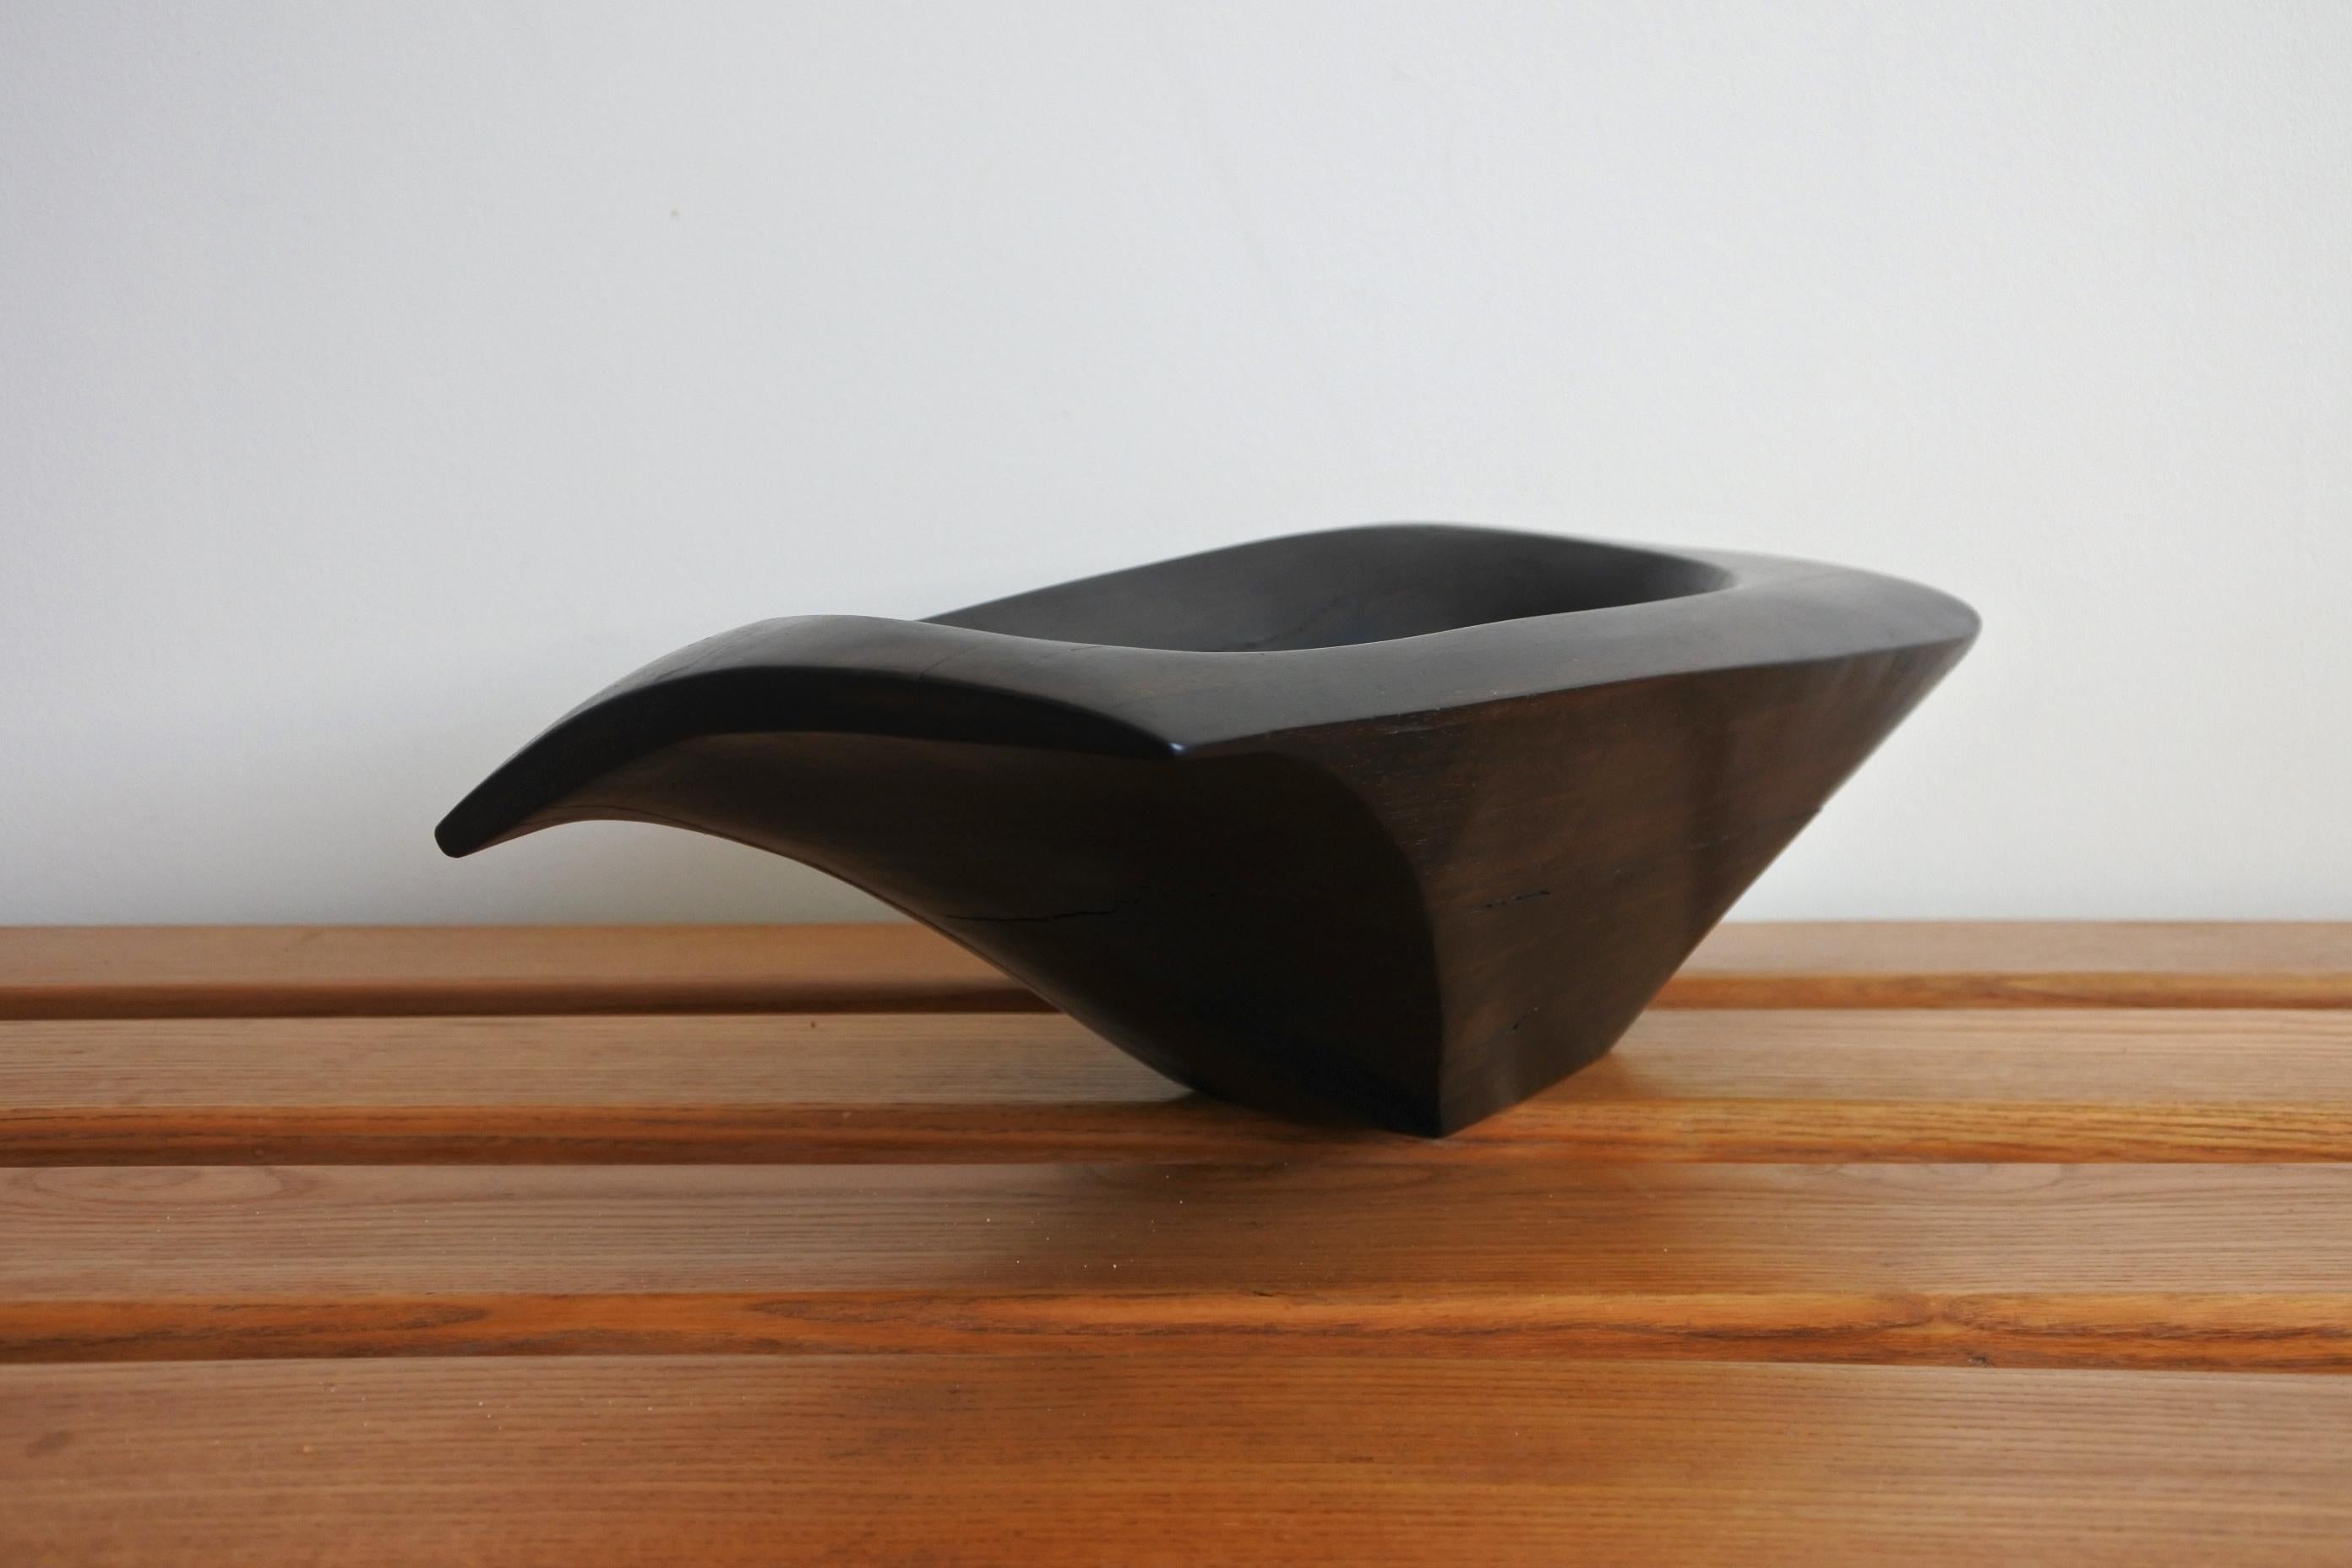 Sculptural freeform dish in the style of French sculptor Alexandre Noll.
Hand carved solid ebony wood.
Made in France in the 1950s.
Very decorative.